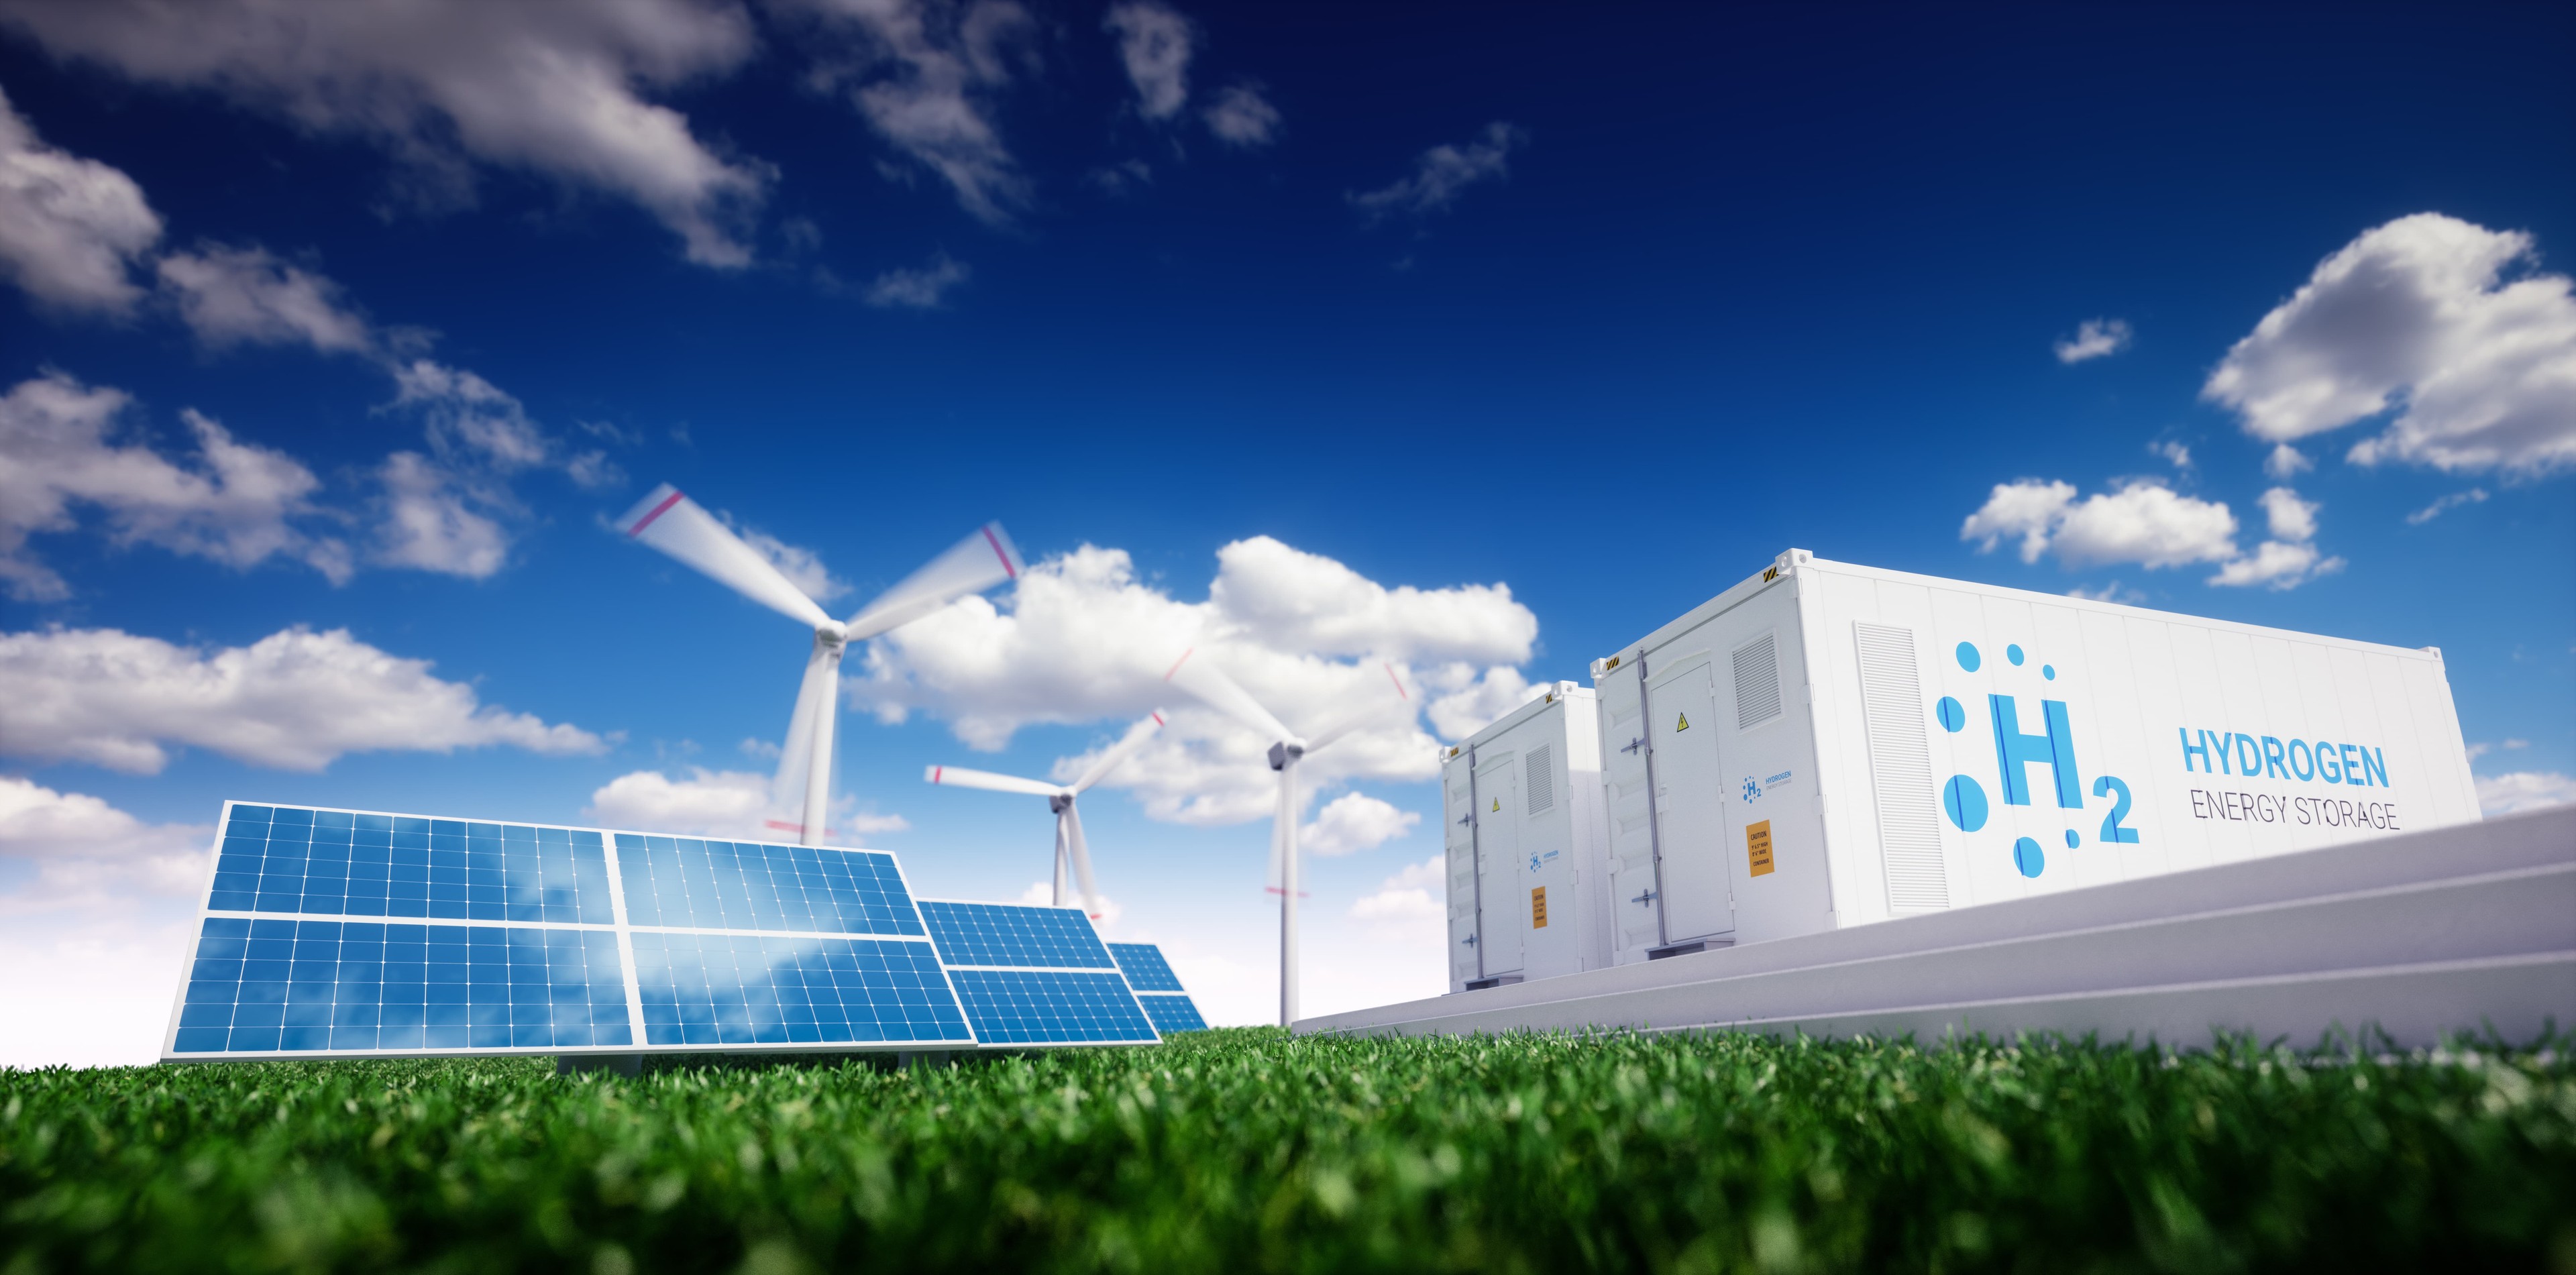 a graphic showing wind turbines and solar photovoltaic panels near hydrogen storage containers.